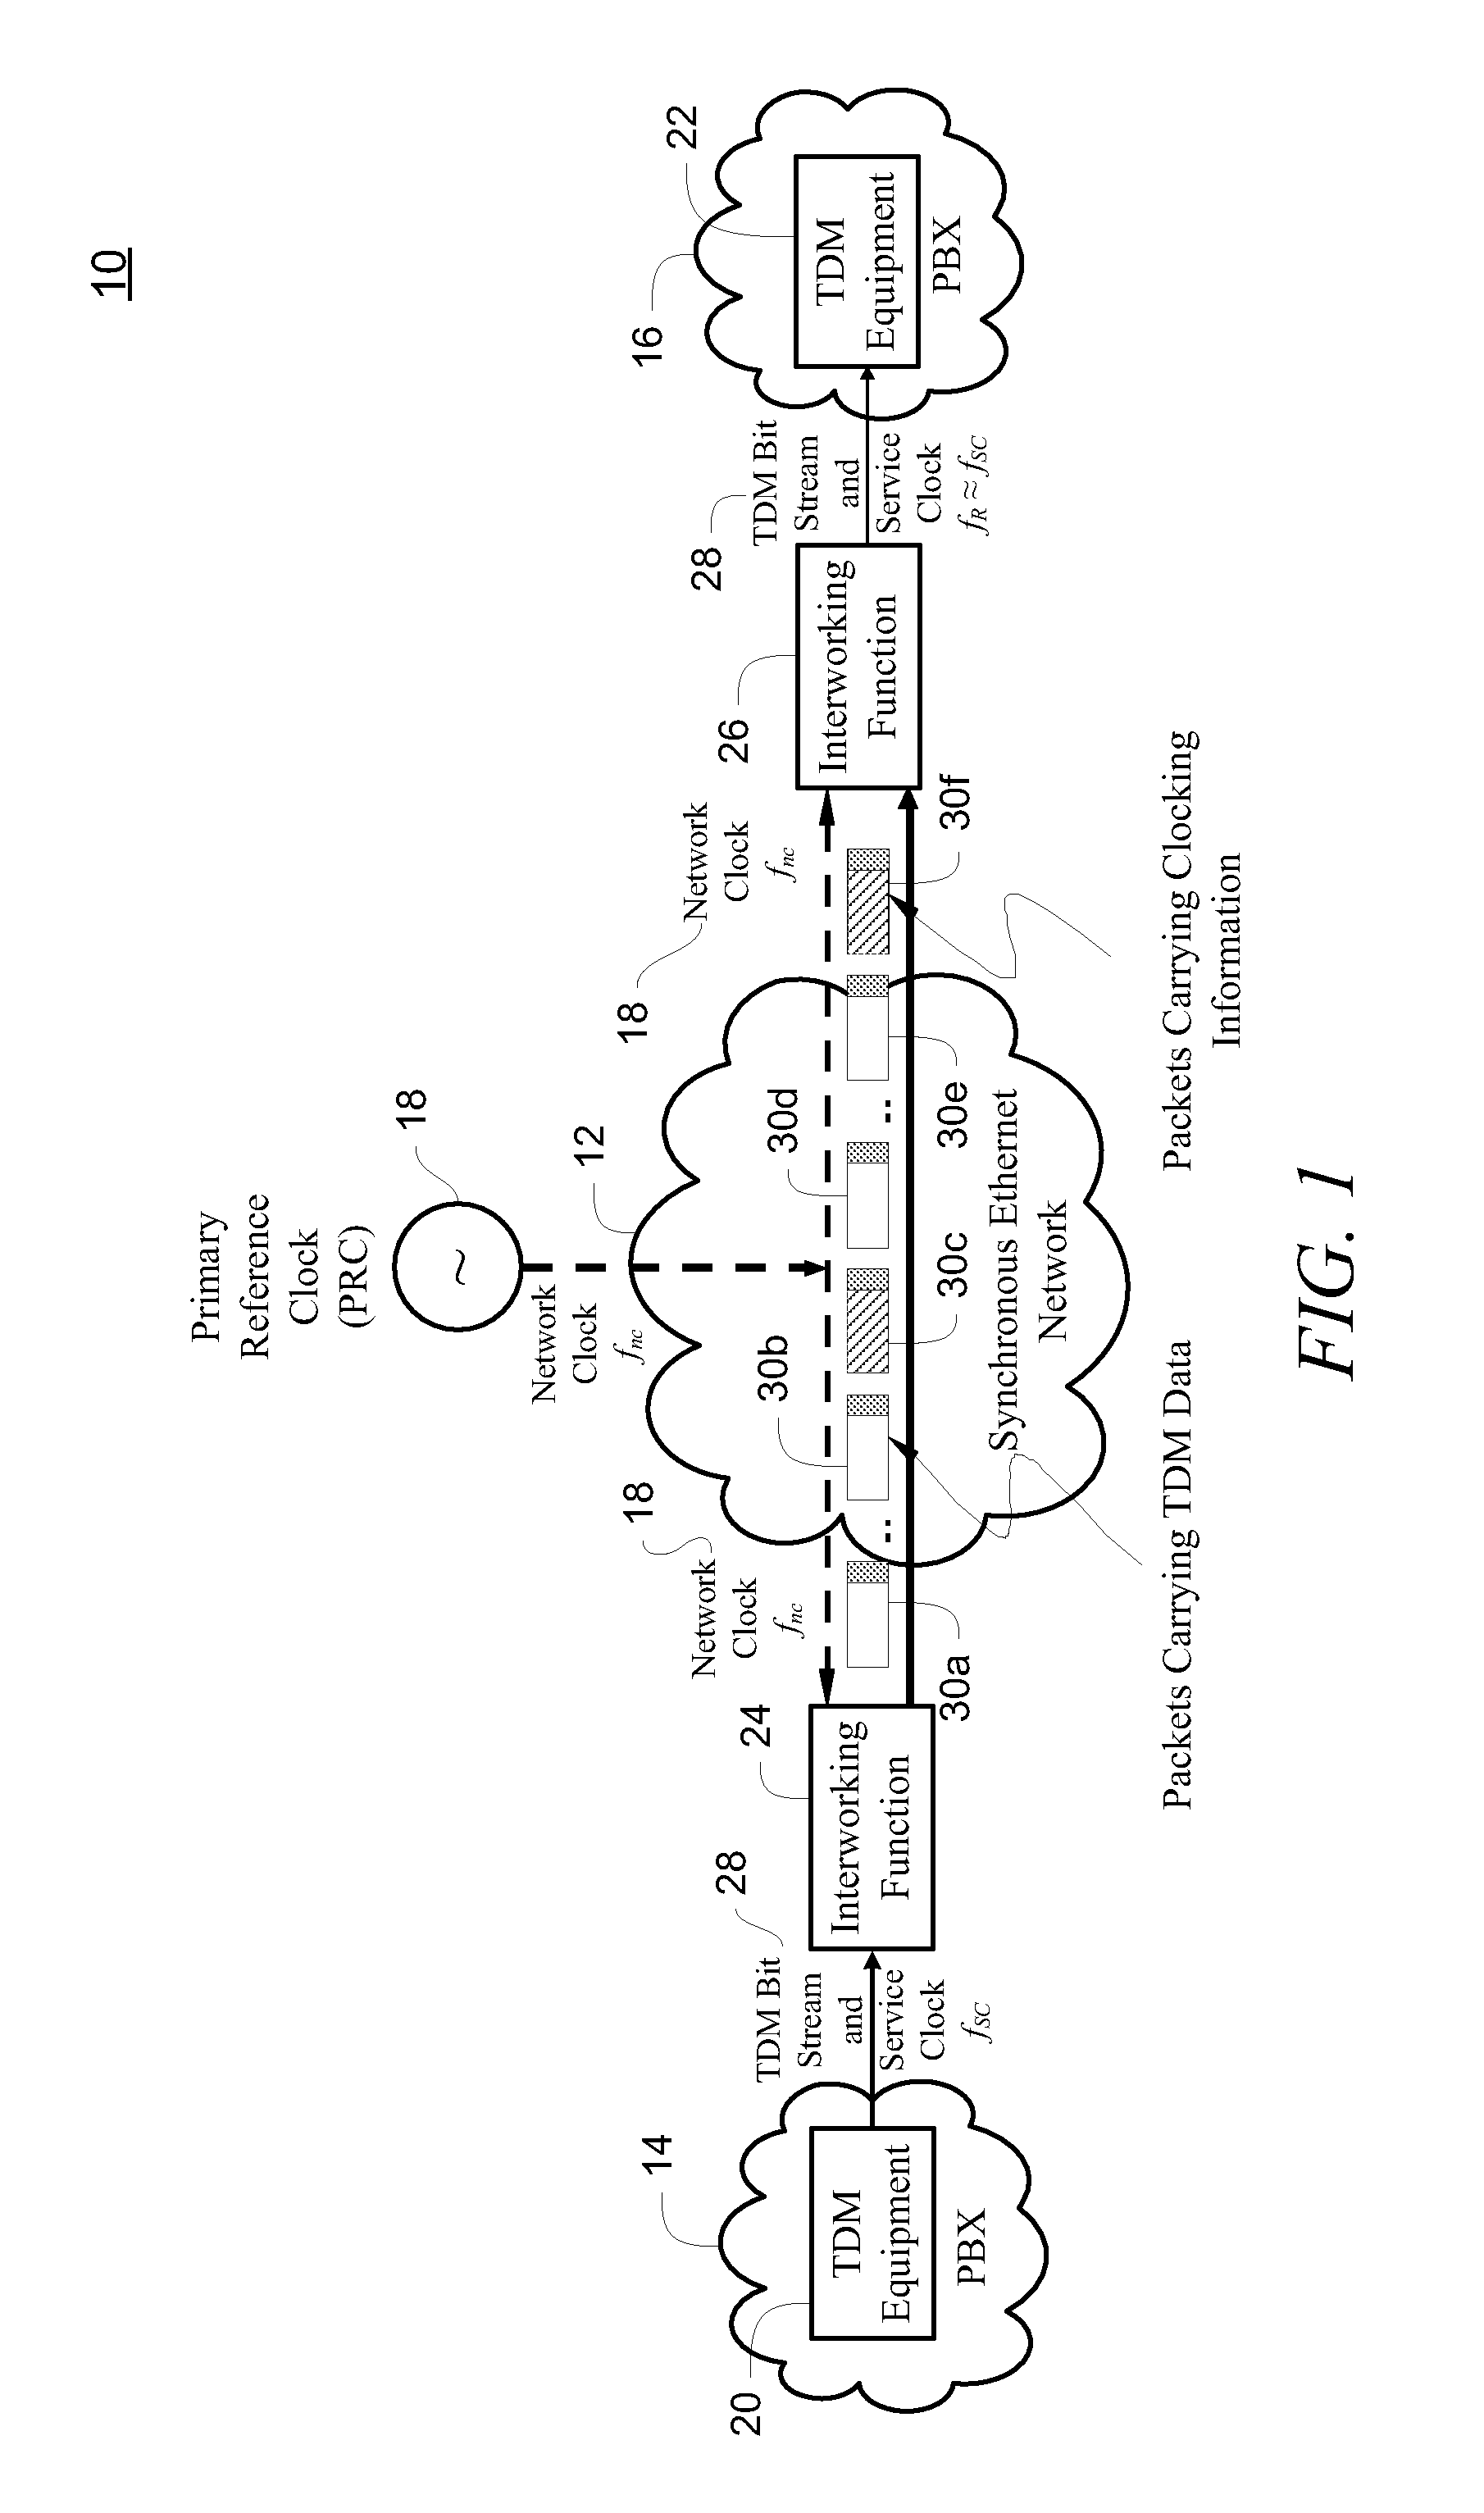 Differential timing transfer over synchronous ethernet using digital frequency generators and control word signaling